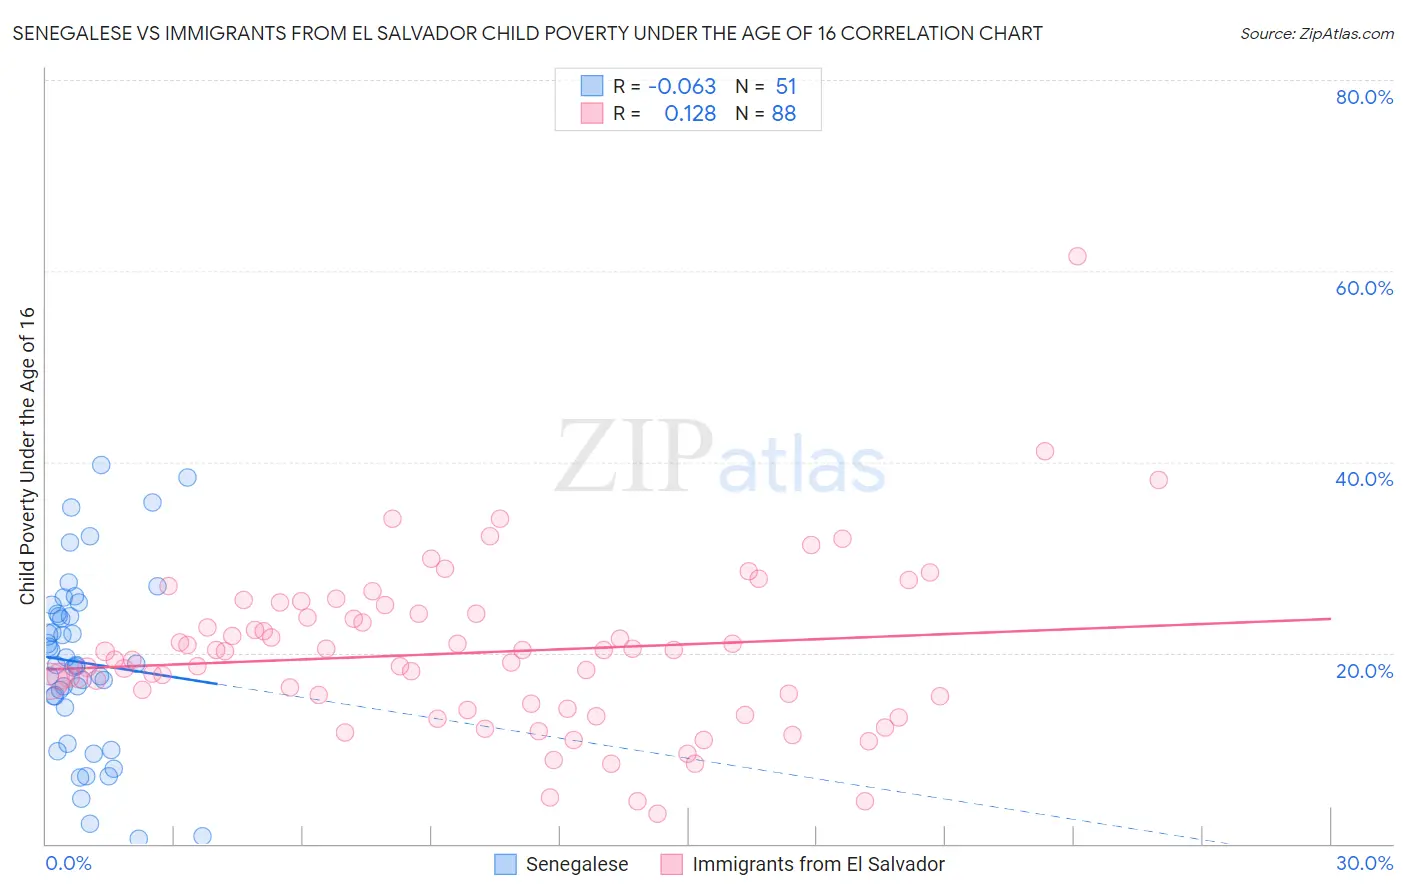 Senegalese vs Immigrants from El Salvador Child Poverty Under the Age of 16